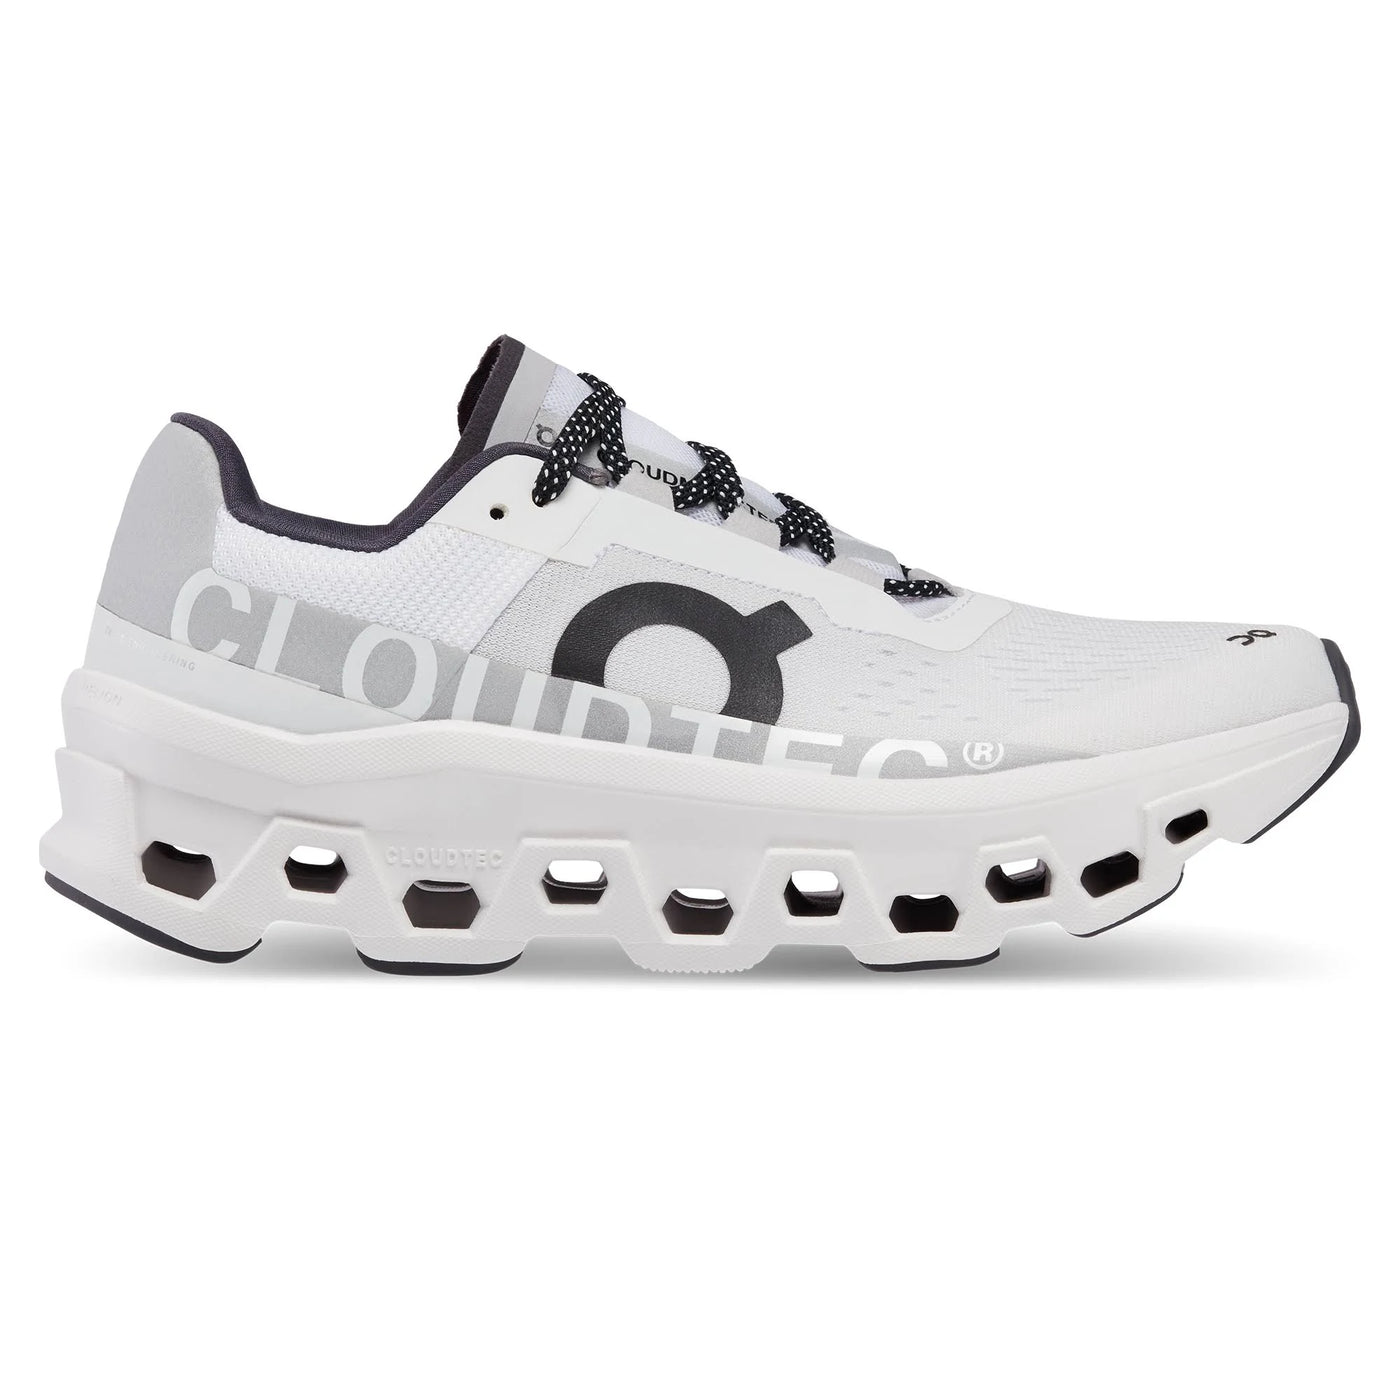 On Running Women's Cloud Monster Shoes-Footwear-ALL WHITE-6-Kevin's Fine Outdoor Gear & Apparel